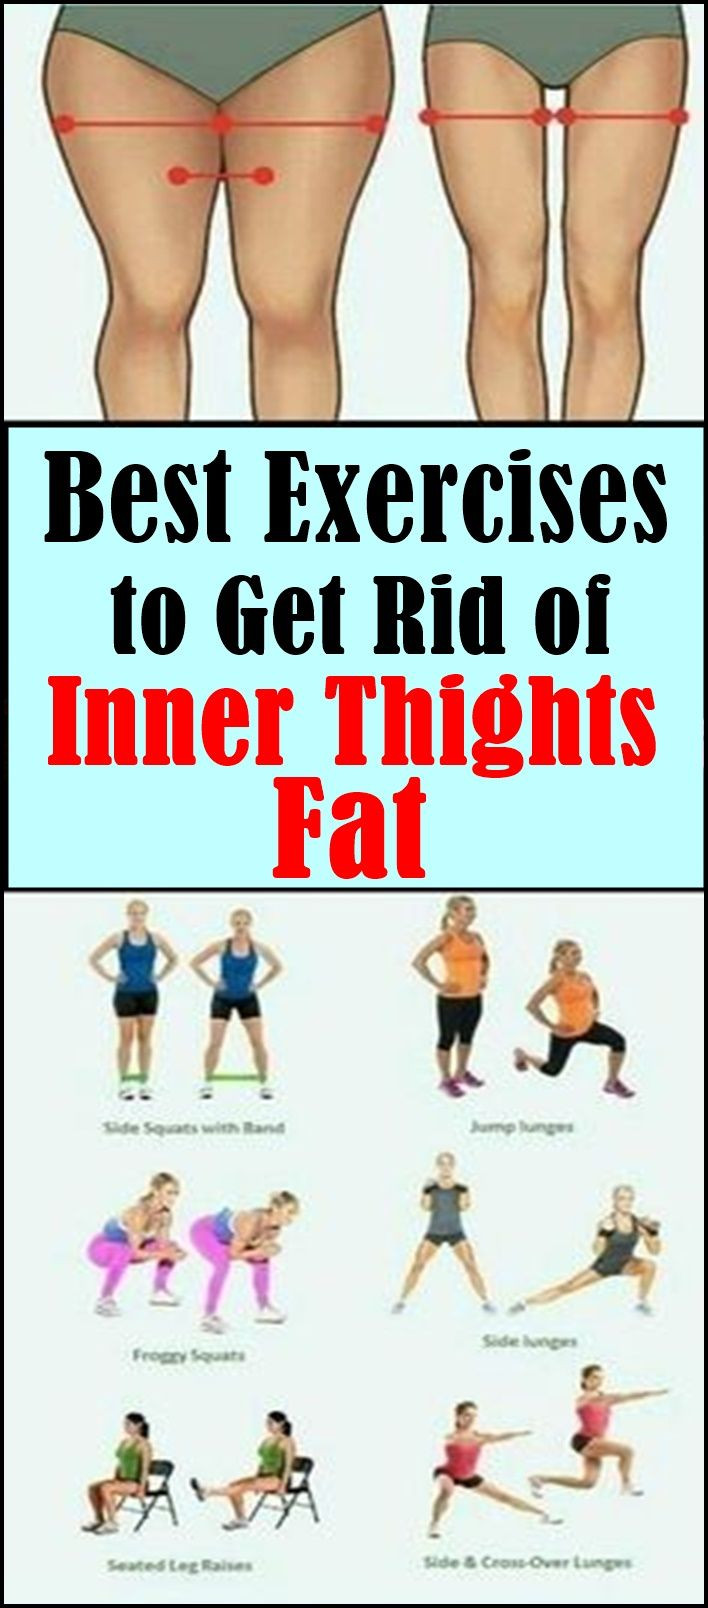 15 Excellent Inner Thigh Fat Burning Workout - Best Product Reviews